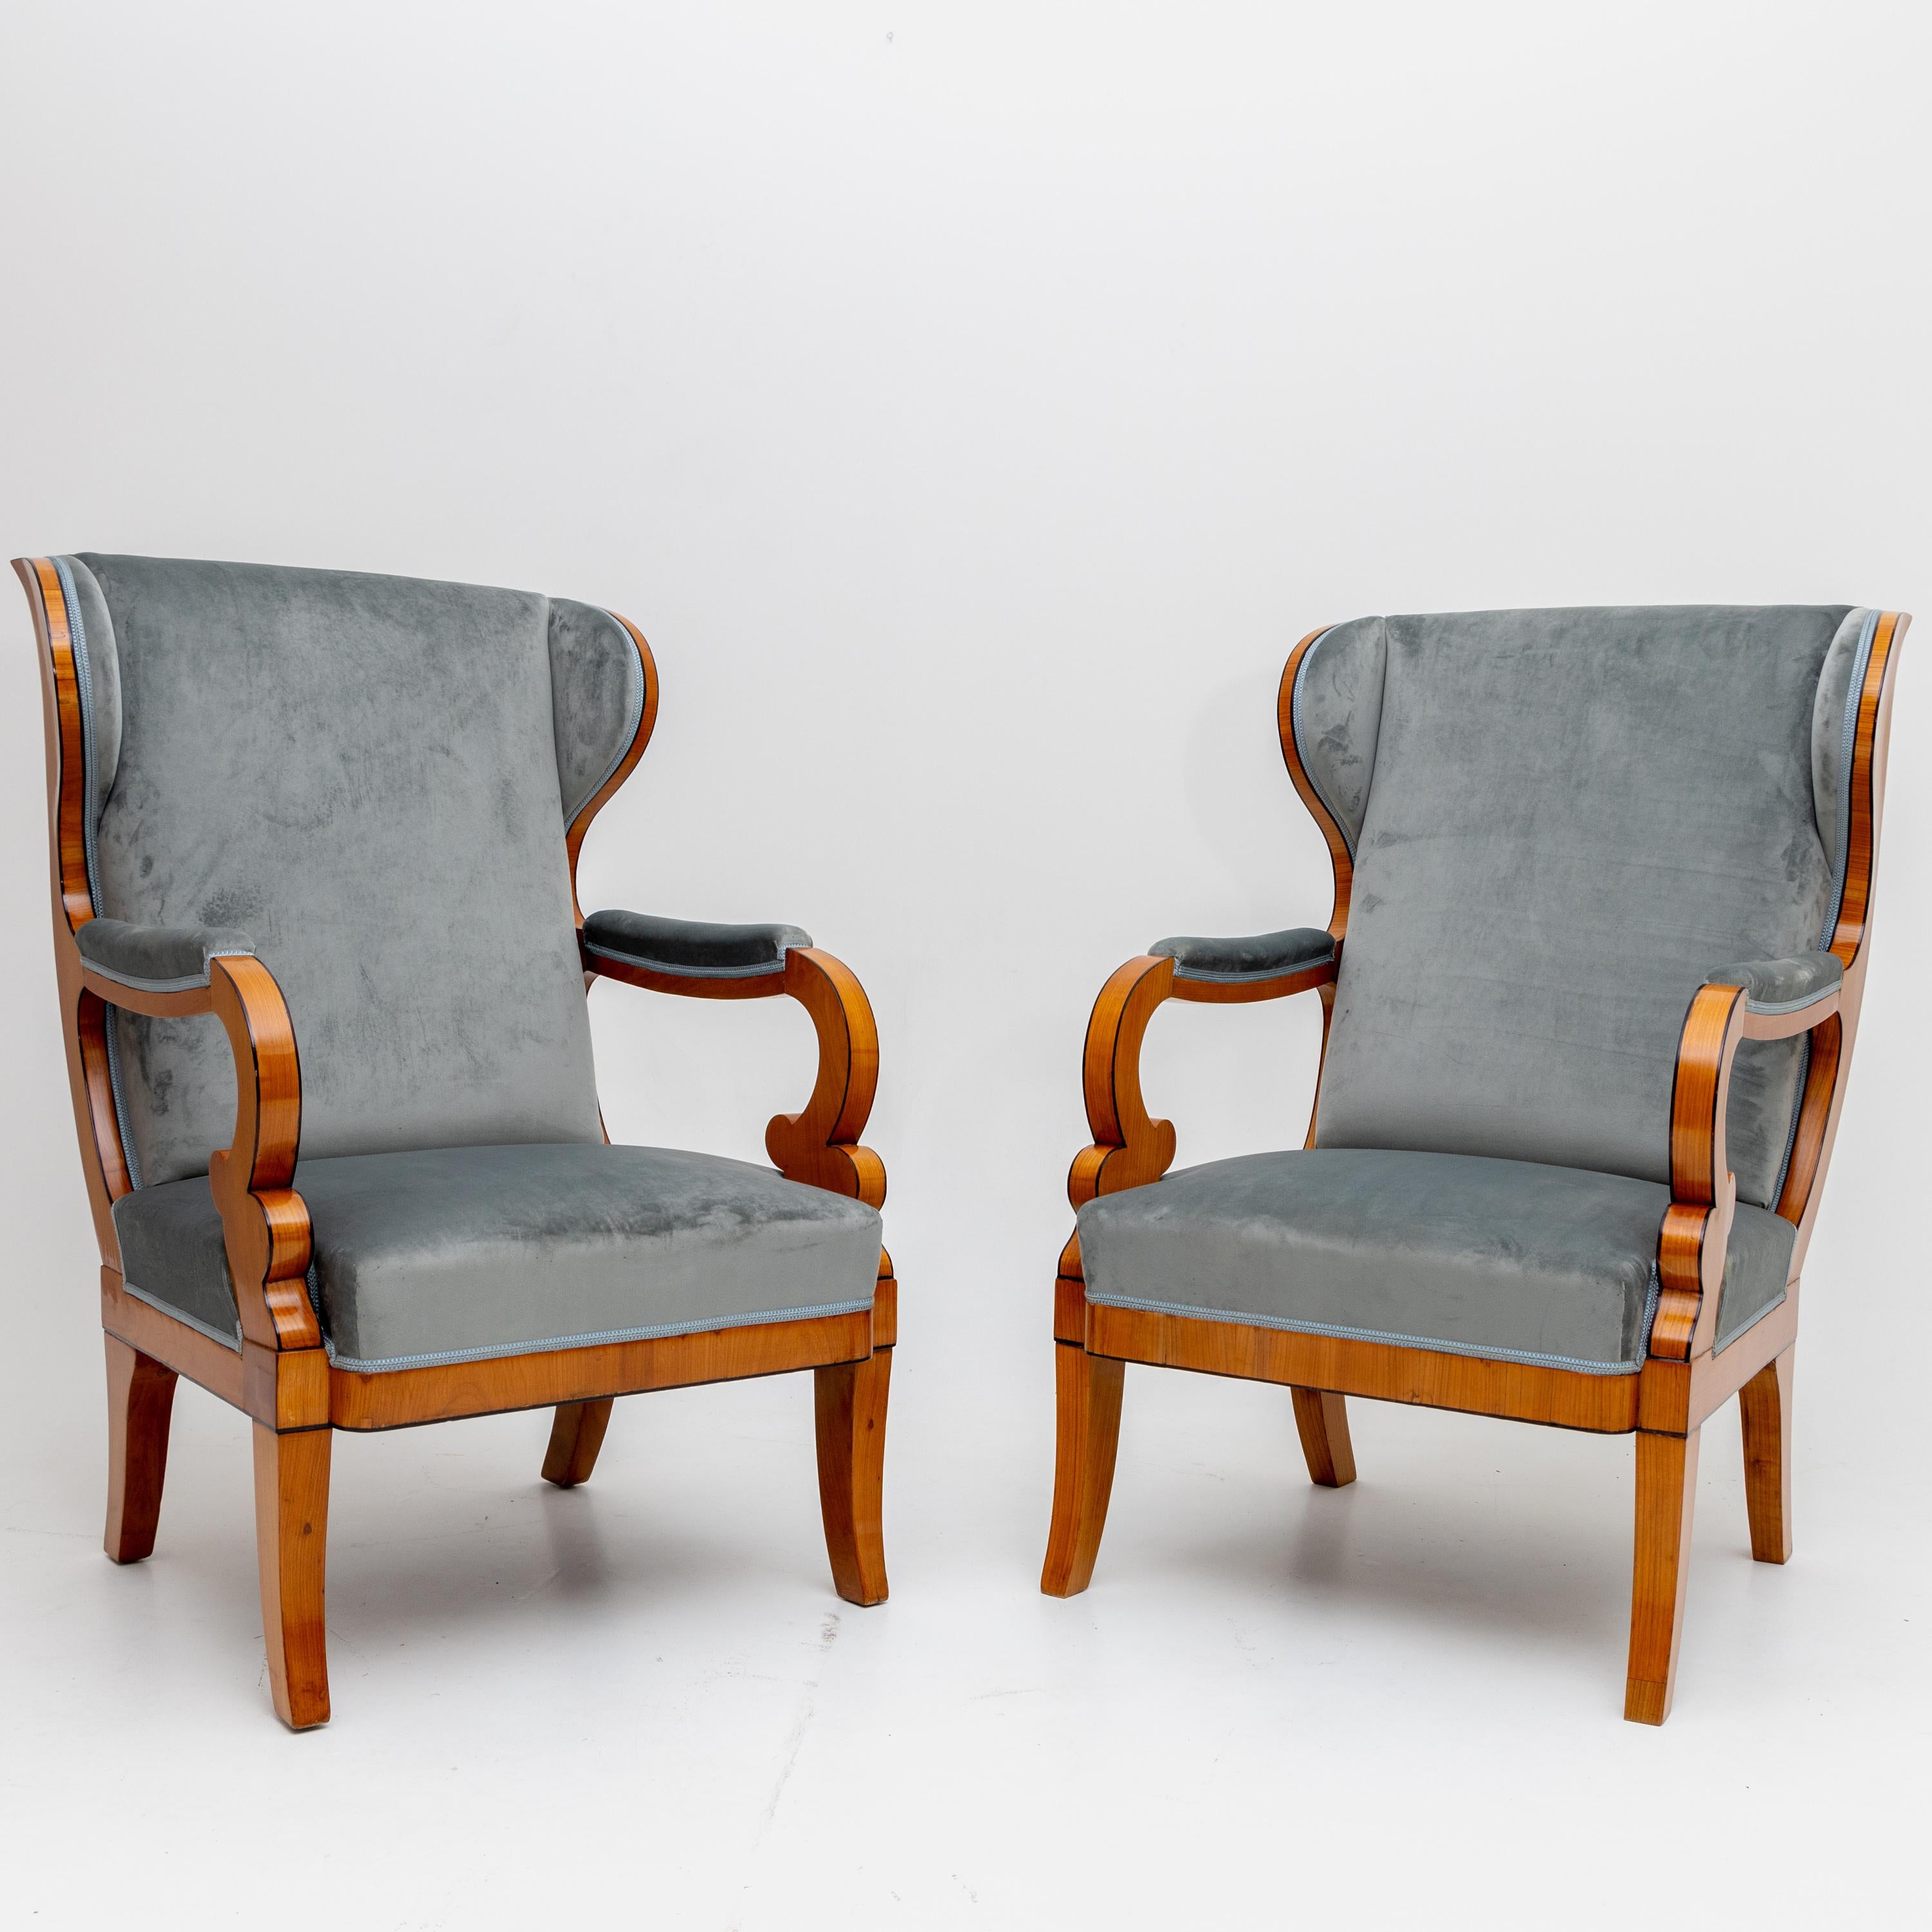 19th Century Pair of Wingback Chairs, c. 1830 For Sale